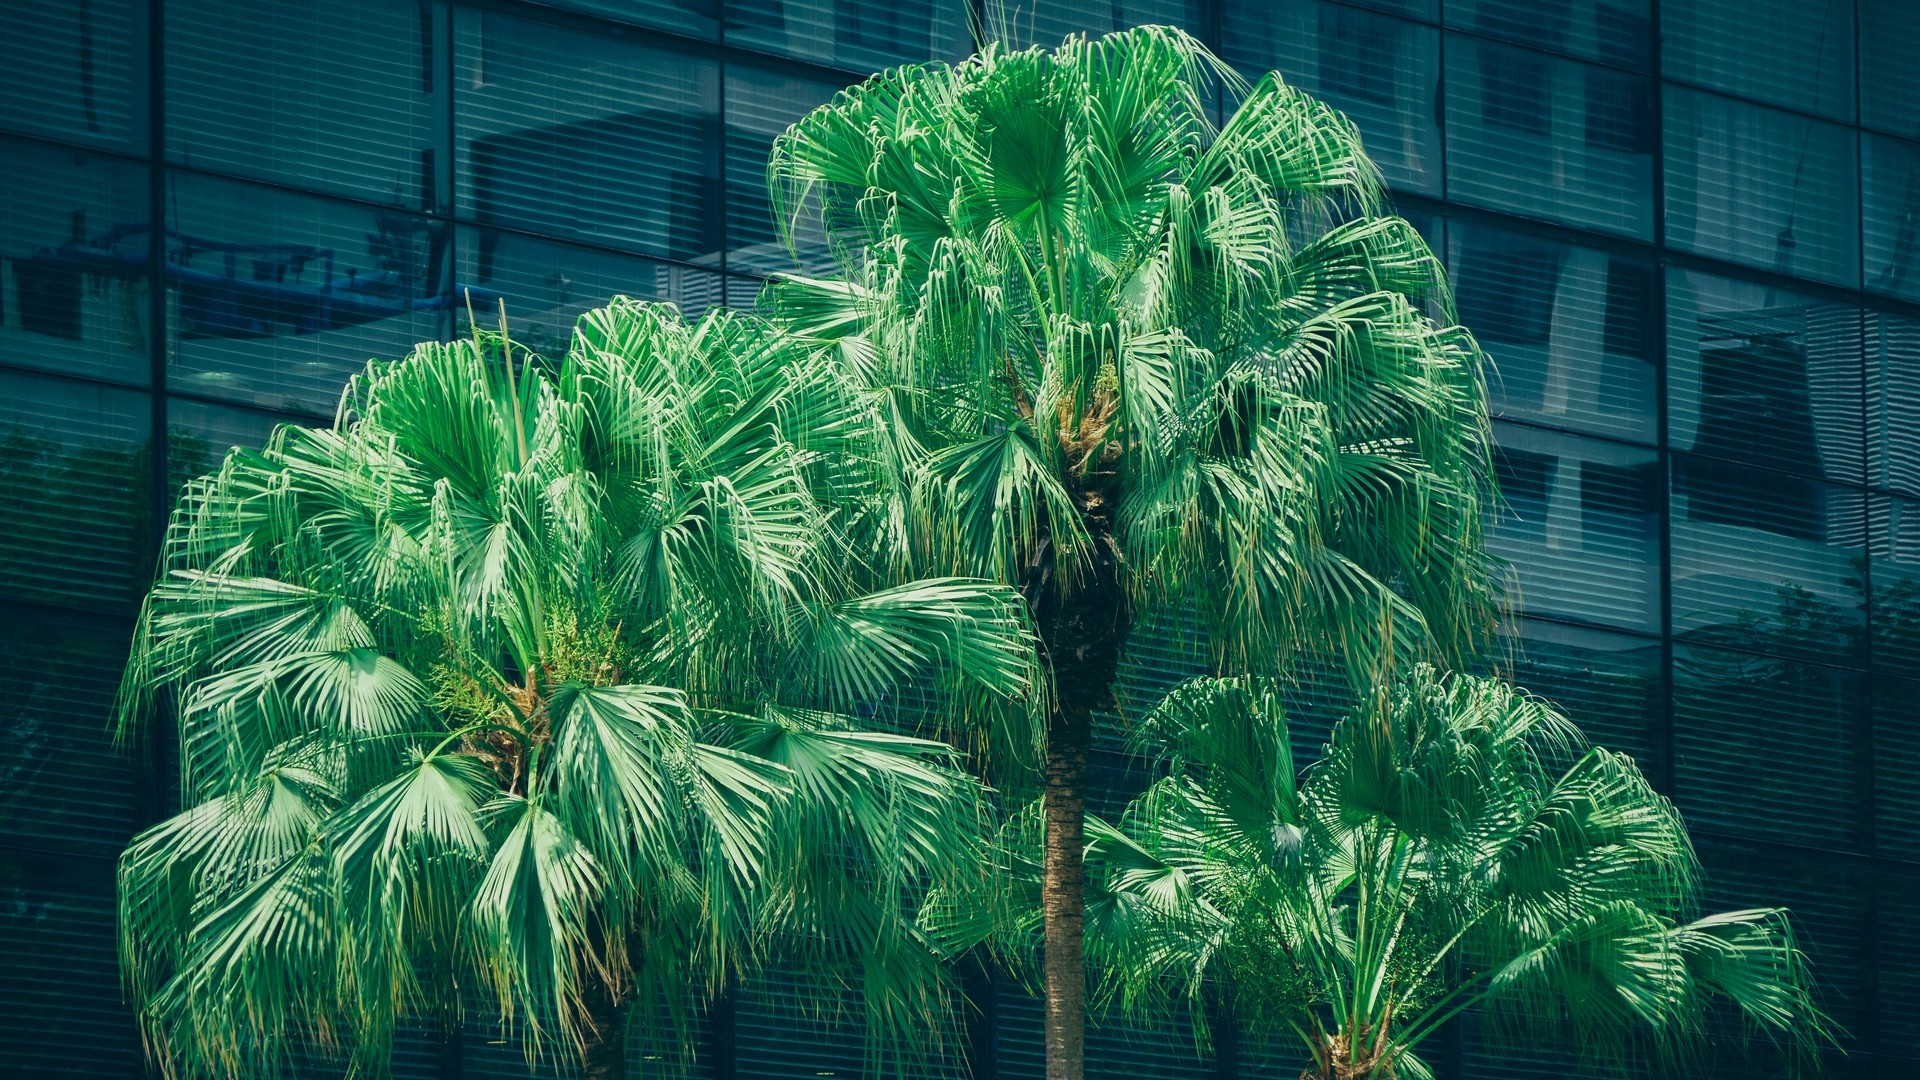 1920x1080 wallpapers: palm trees, foliage (image)